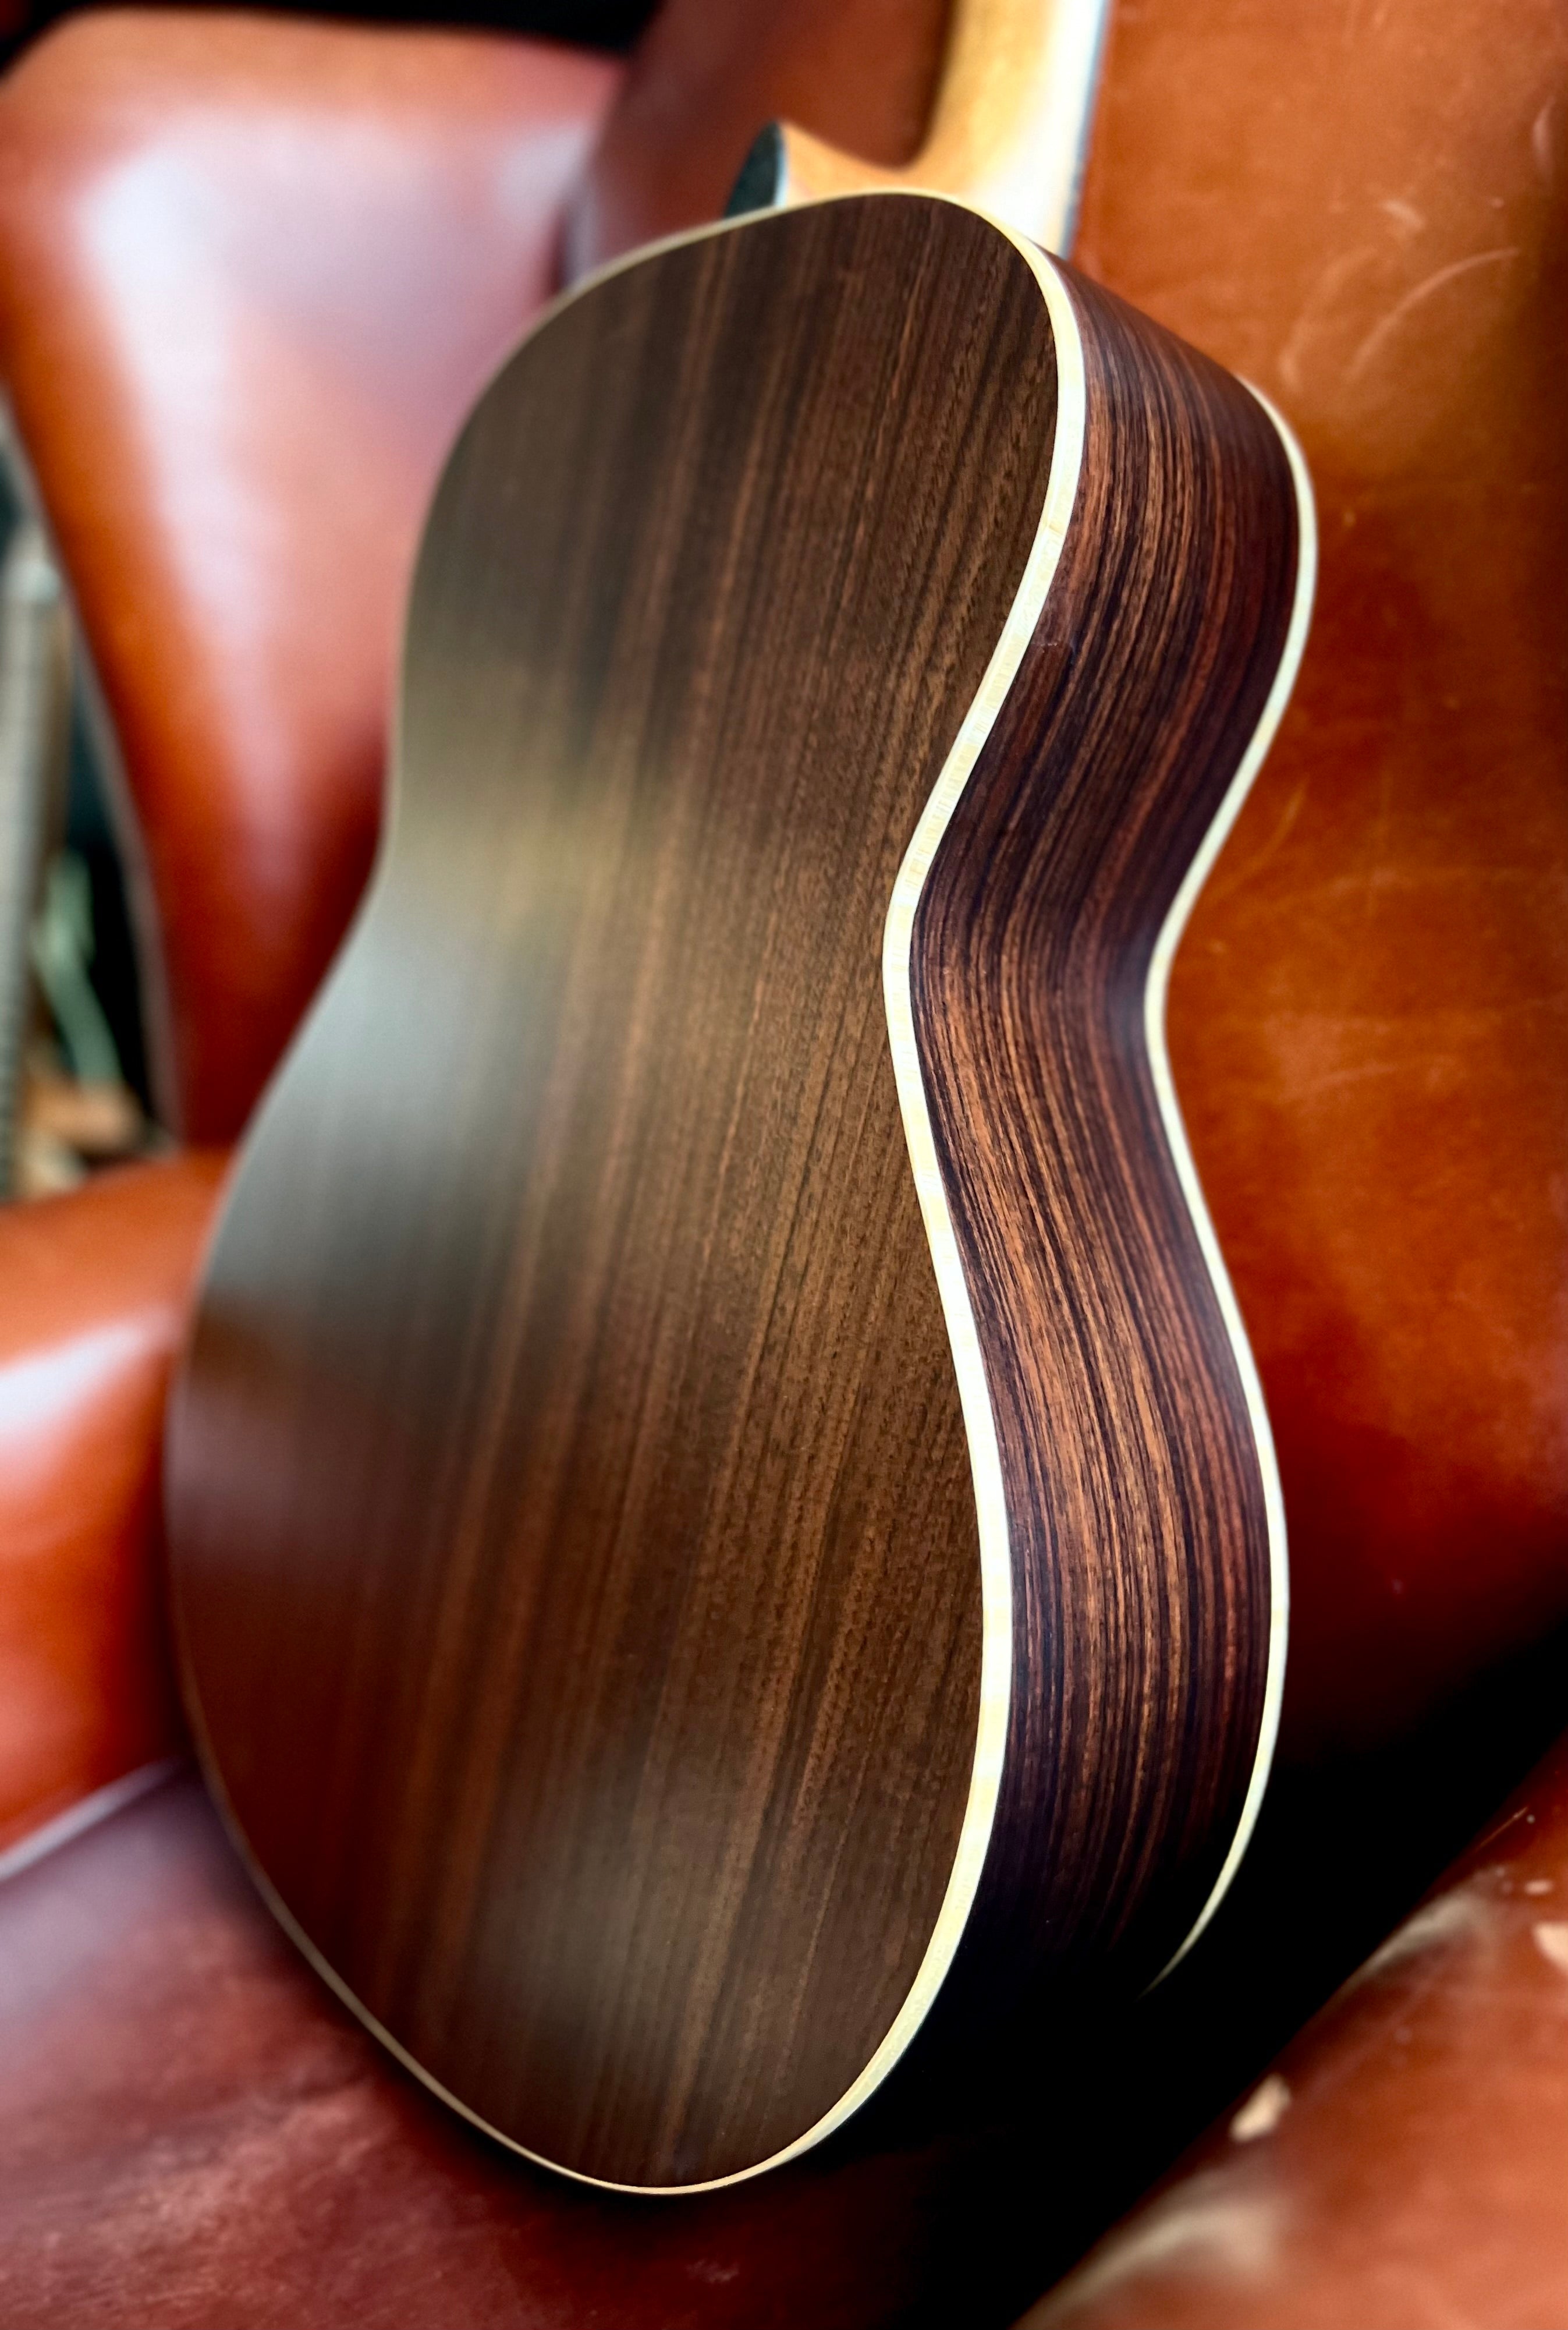 Dowina Rosewood OMG-DS Deluxe OM Body Acoustic Guitar, Acoustic Guitar for sale at Richards Guitars.